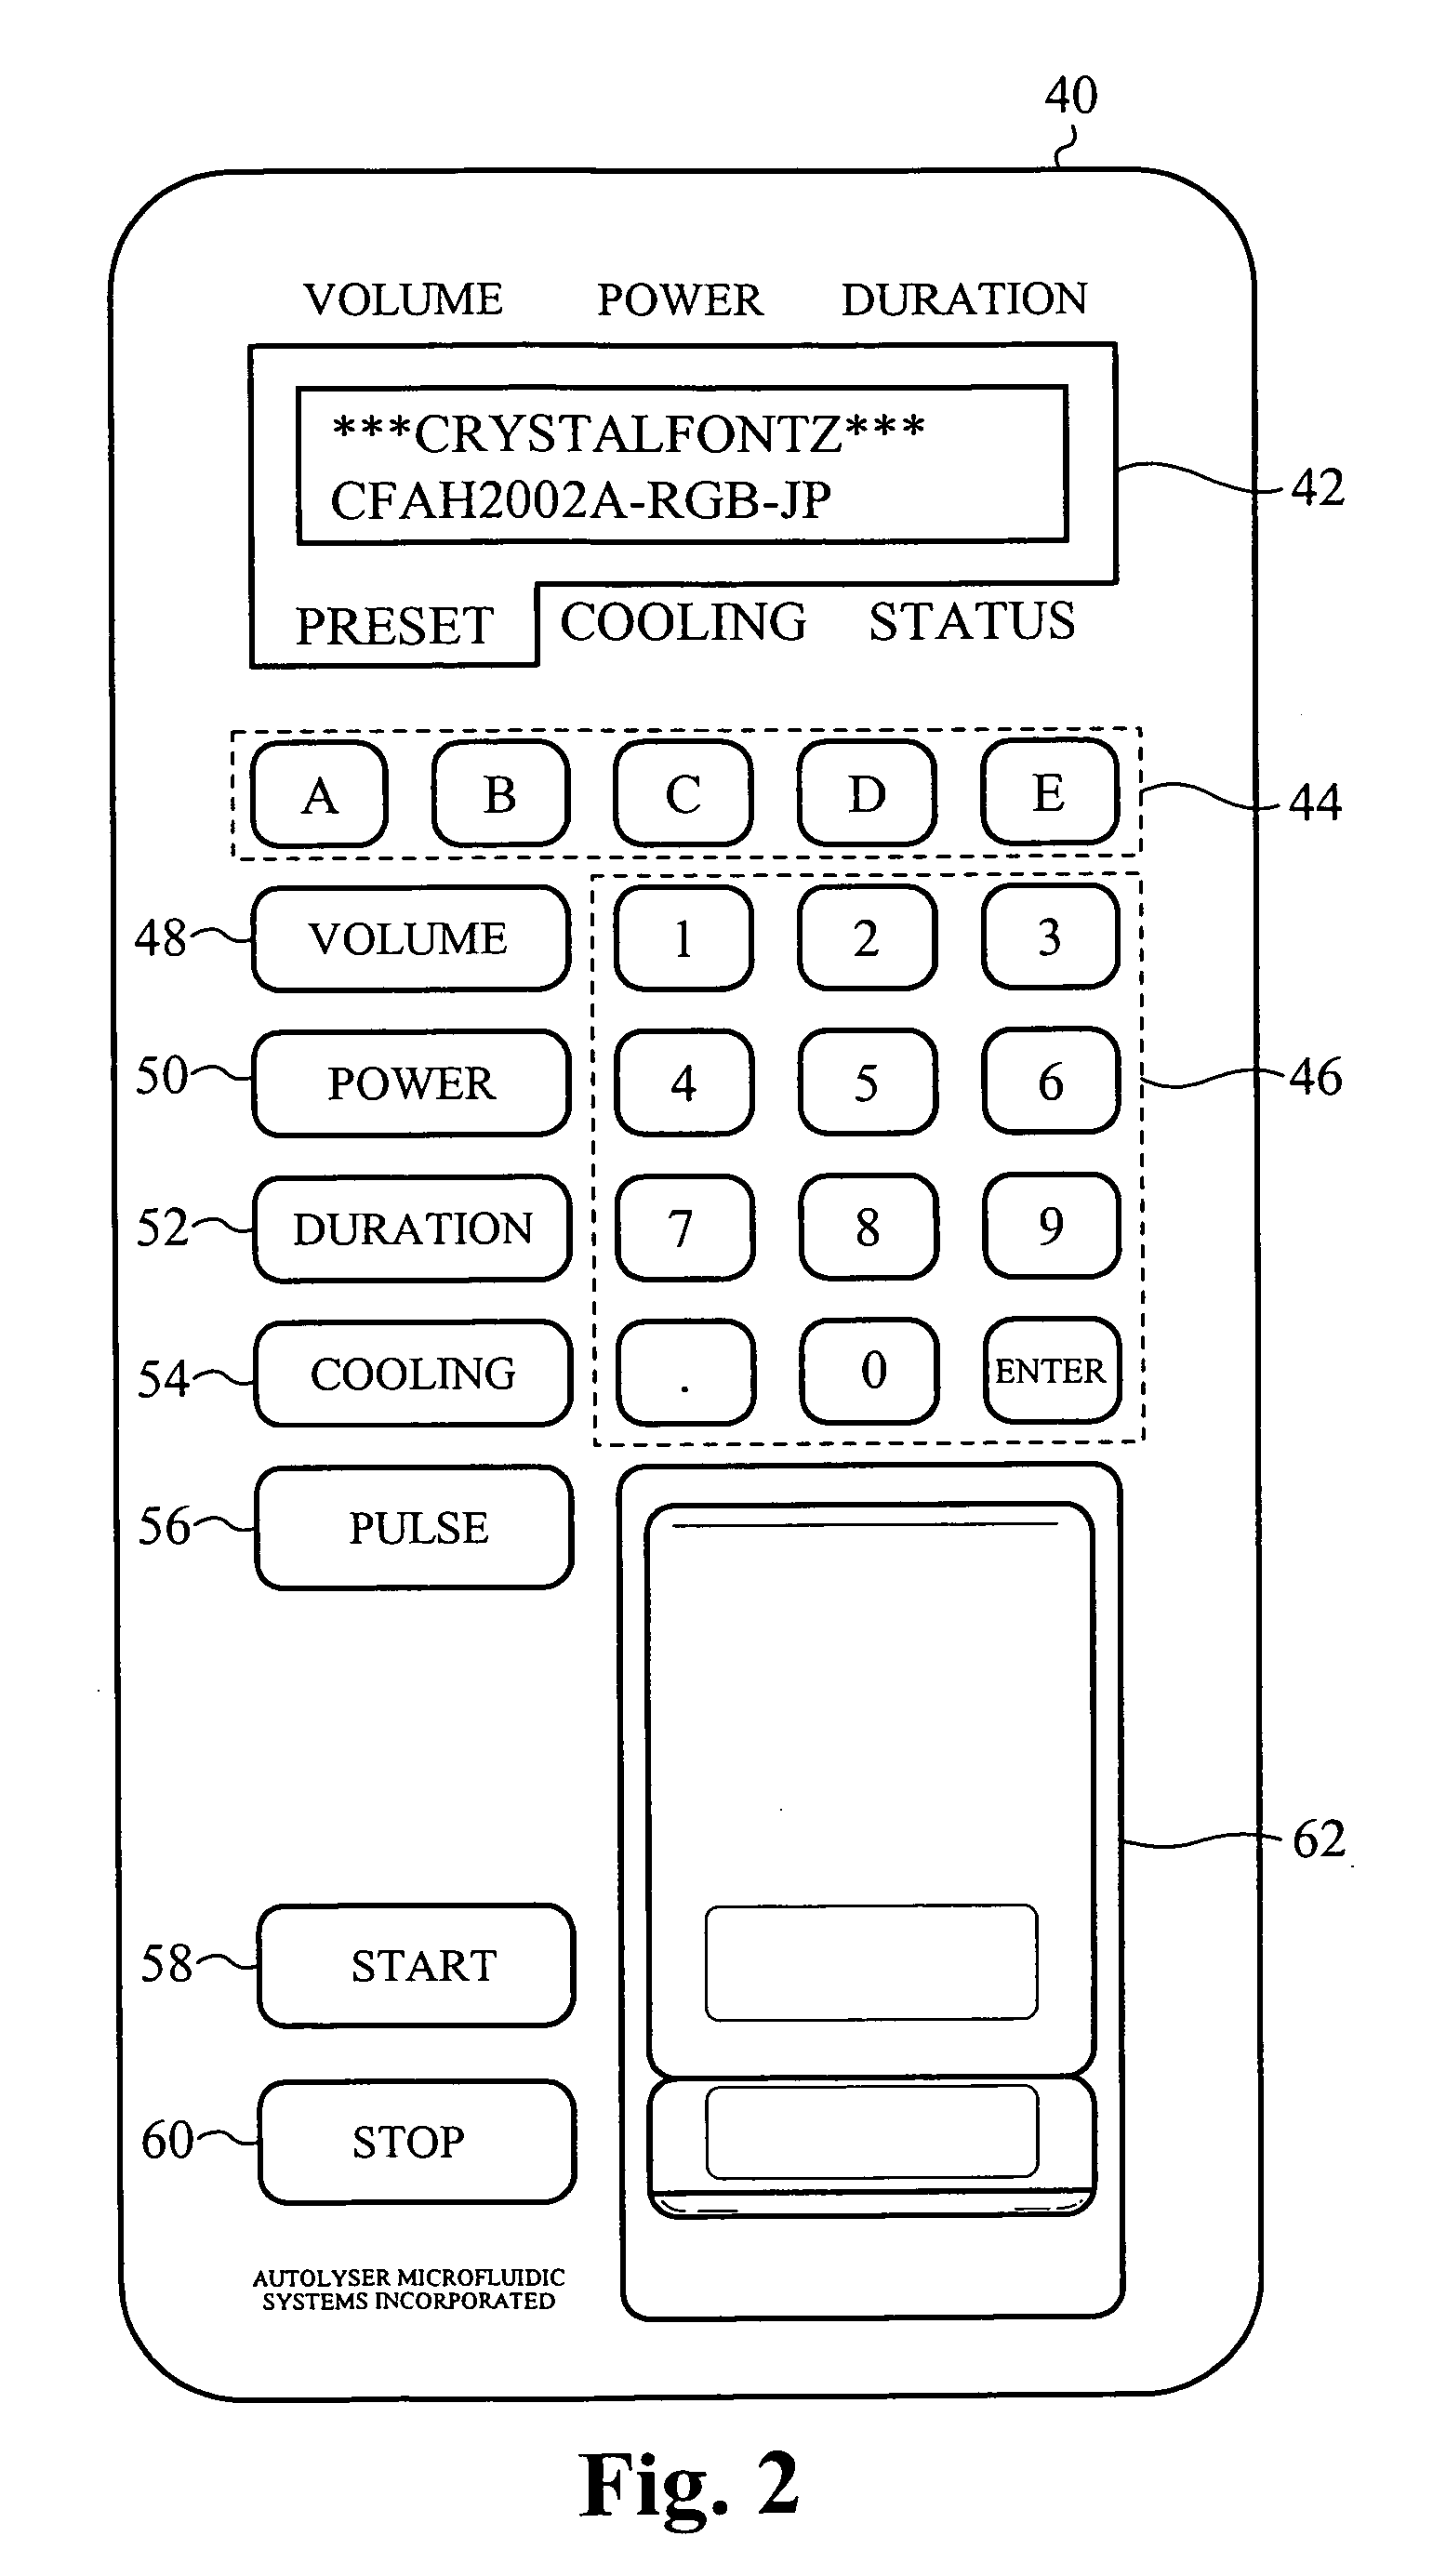 Apparatus to automatically lyse a sample